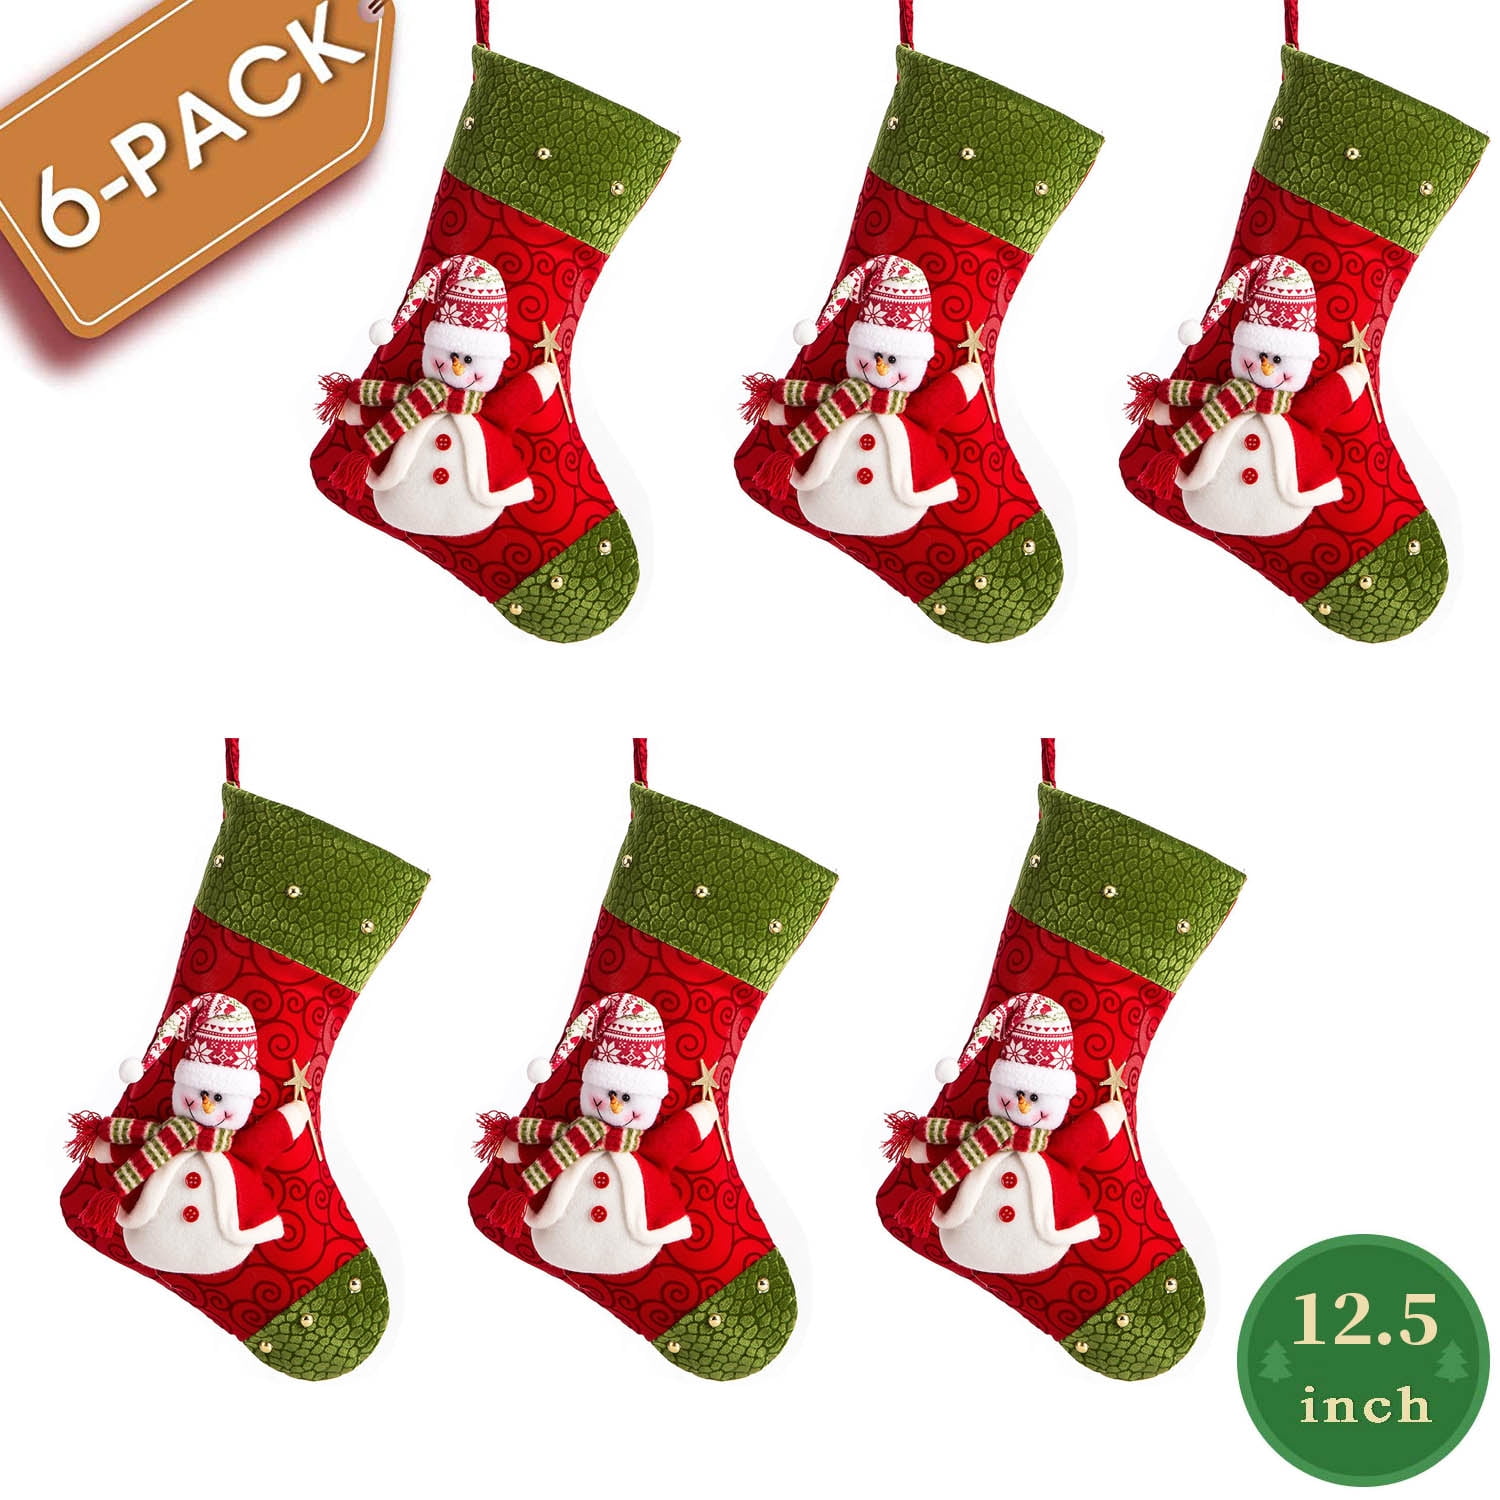 Details about   Christmas Stockings 2 Avail Green Red Bells & Burlap Bag w Santa and Tree Felt 